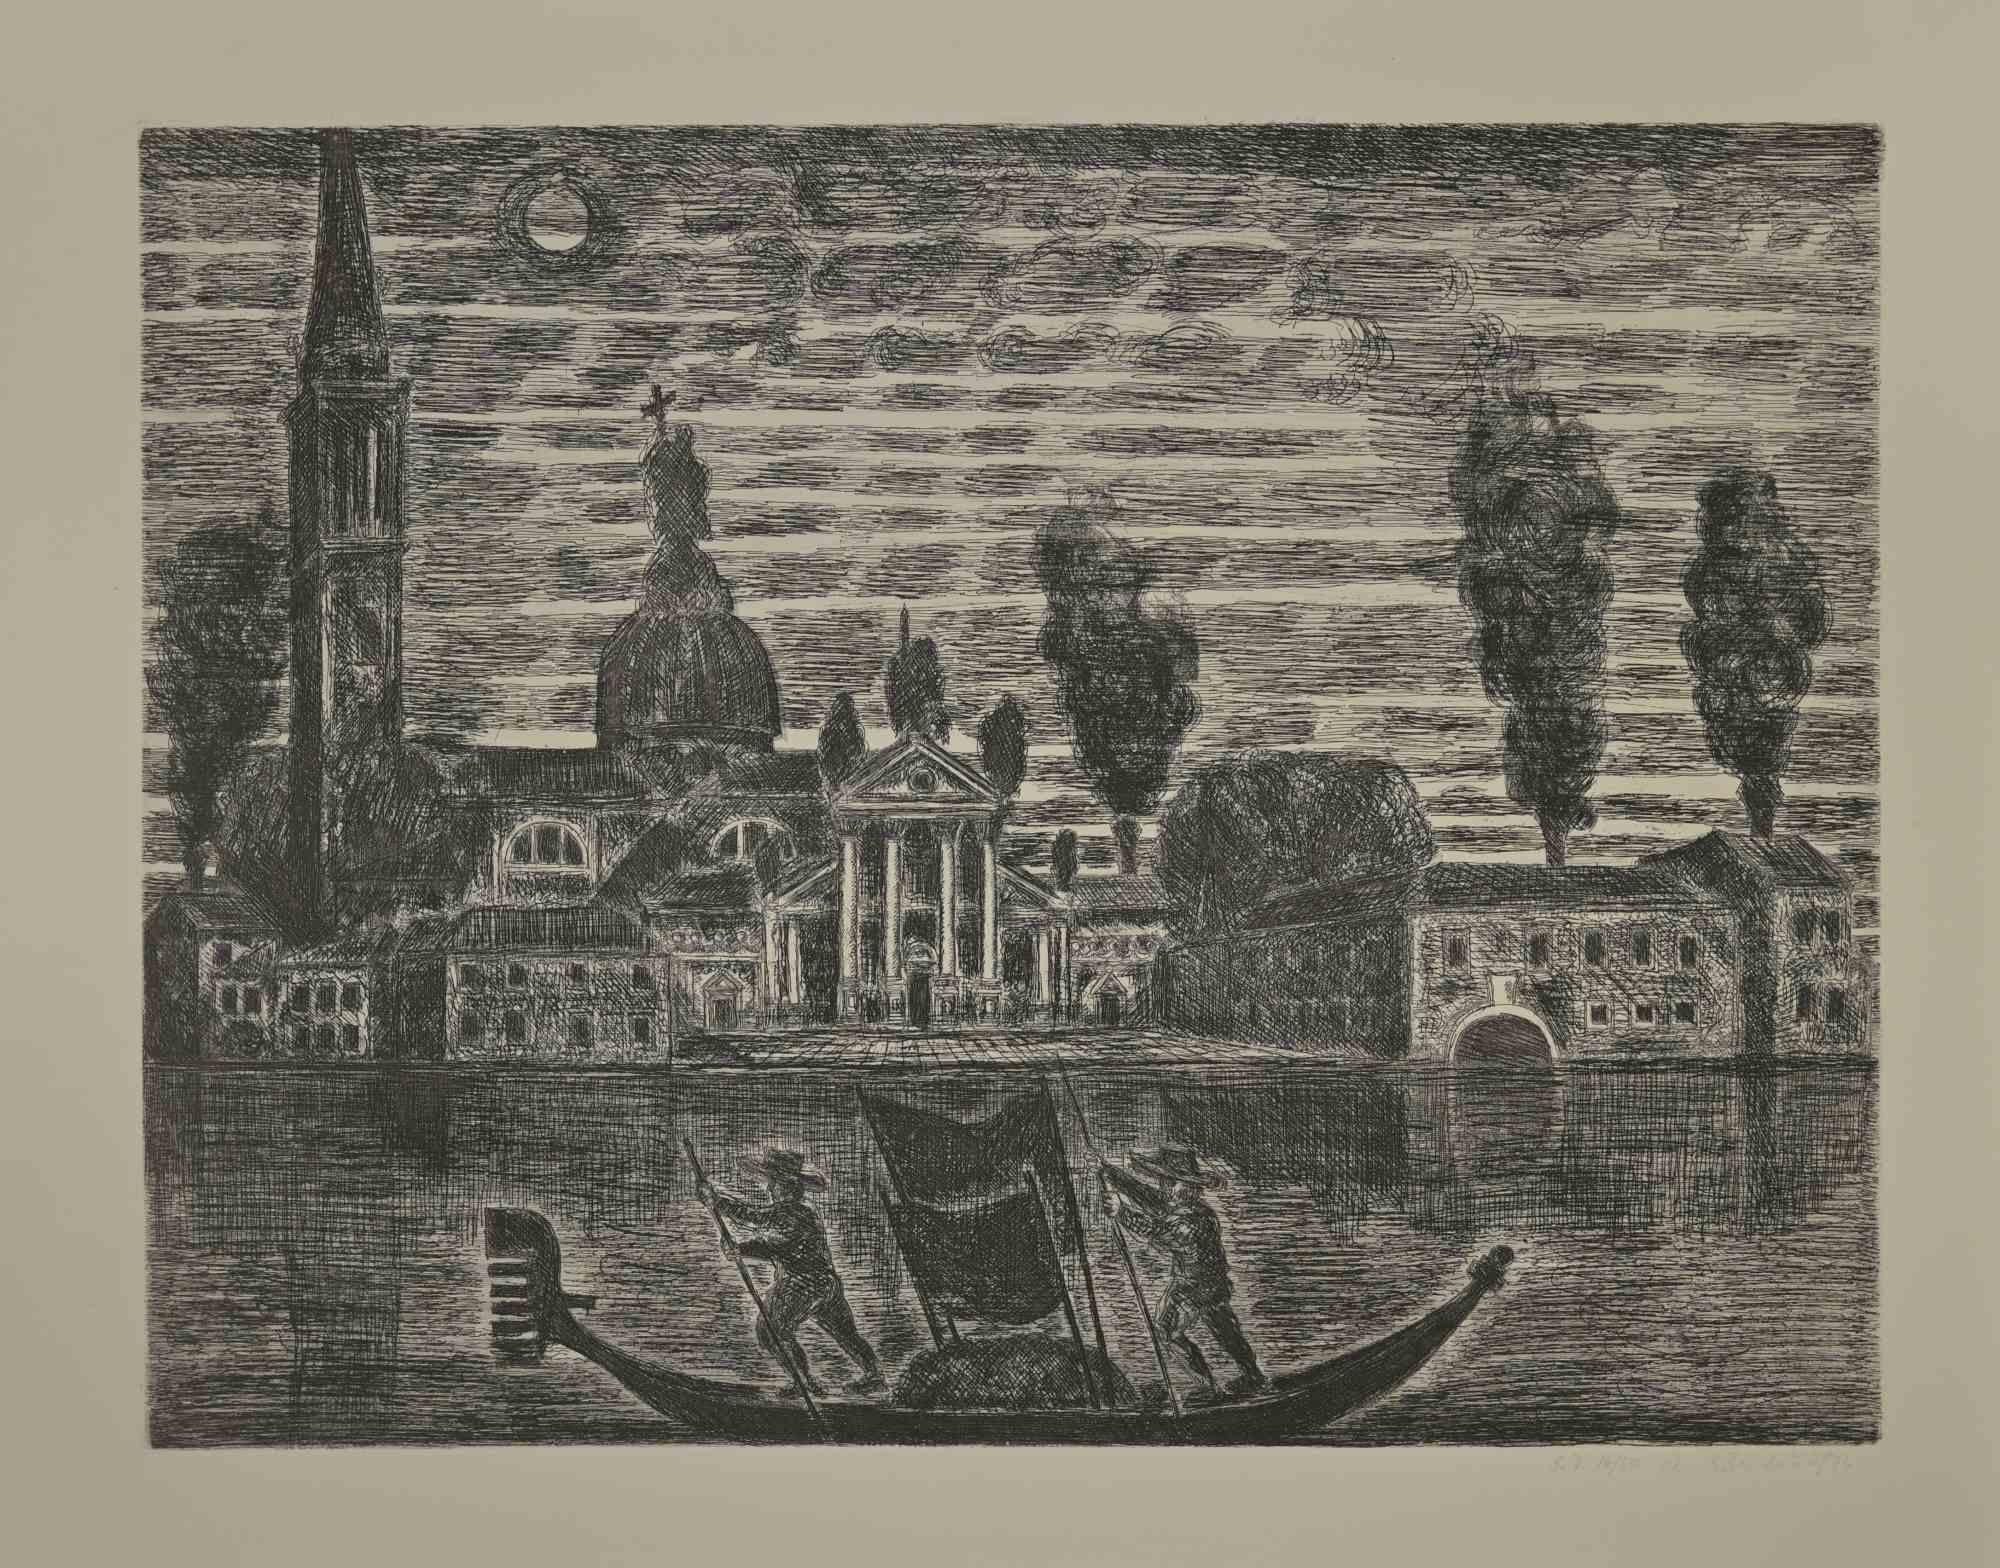 Gondoliers in Venice is an etching realized by Gianpaolo Berto in 1974.

60 X 75 cm,no frame.

Edition 14/50. Numbered and firmed by the artist in the lower margin.

Good conditions.

